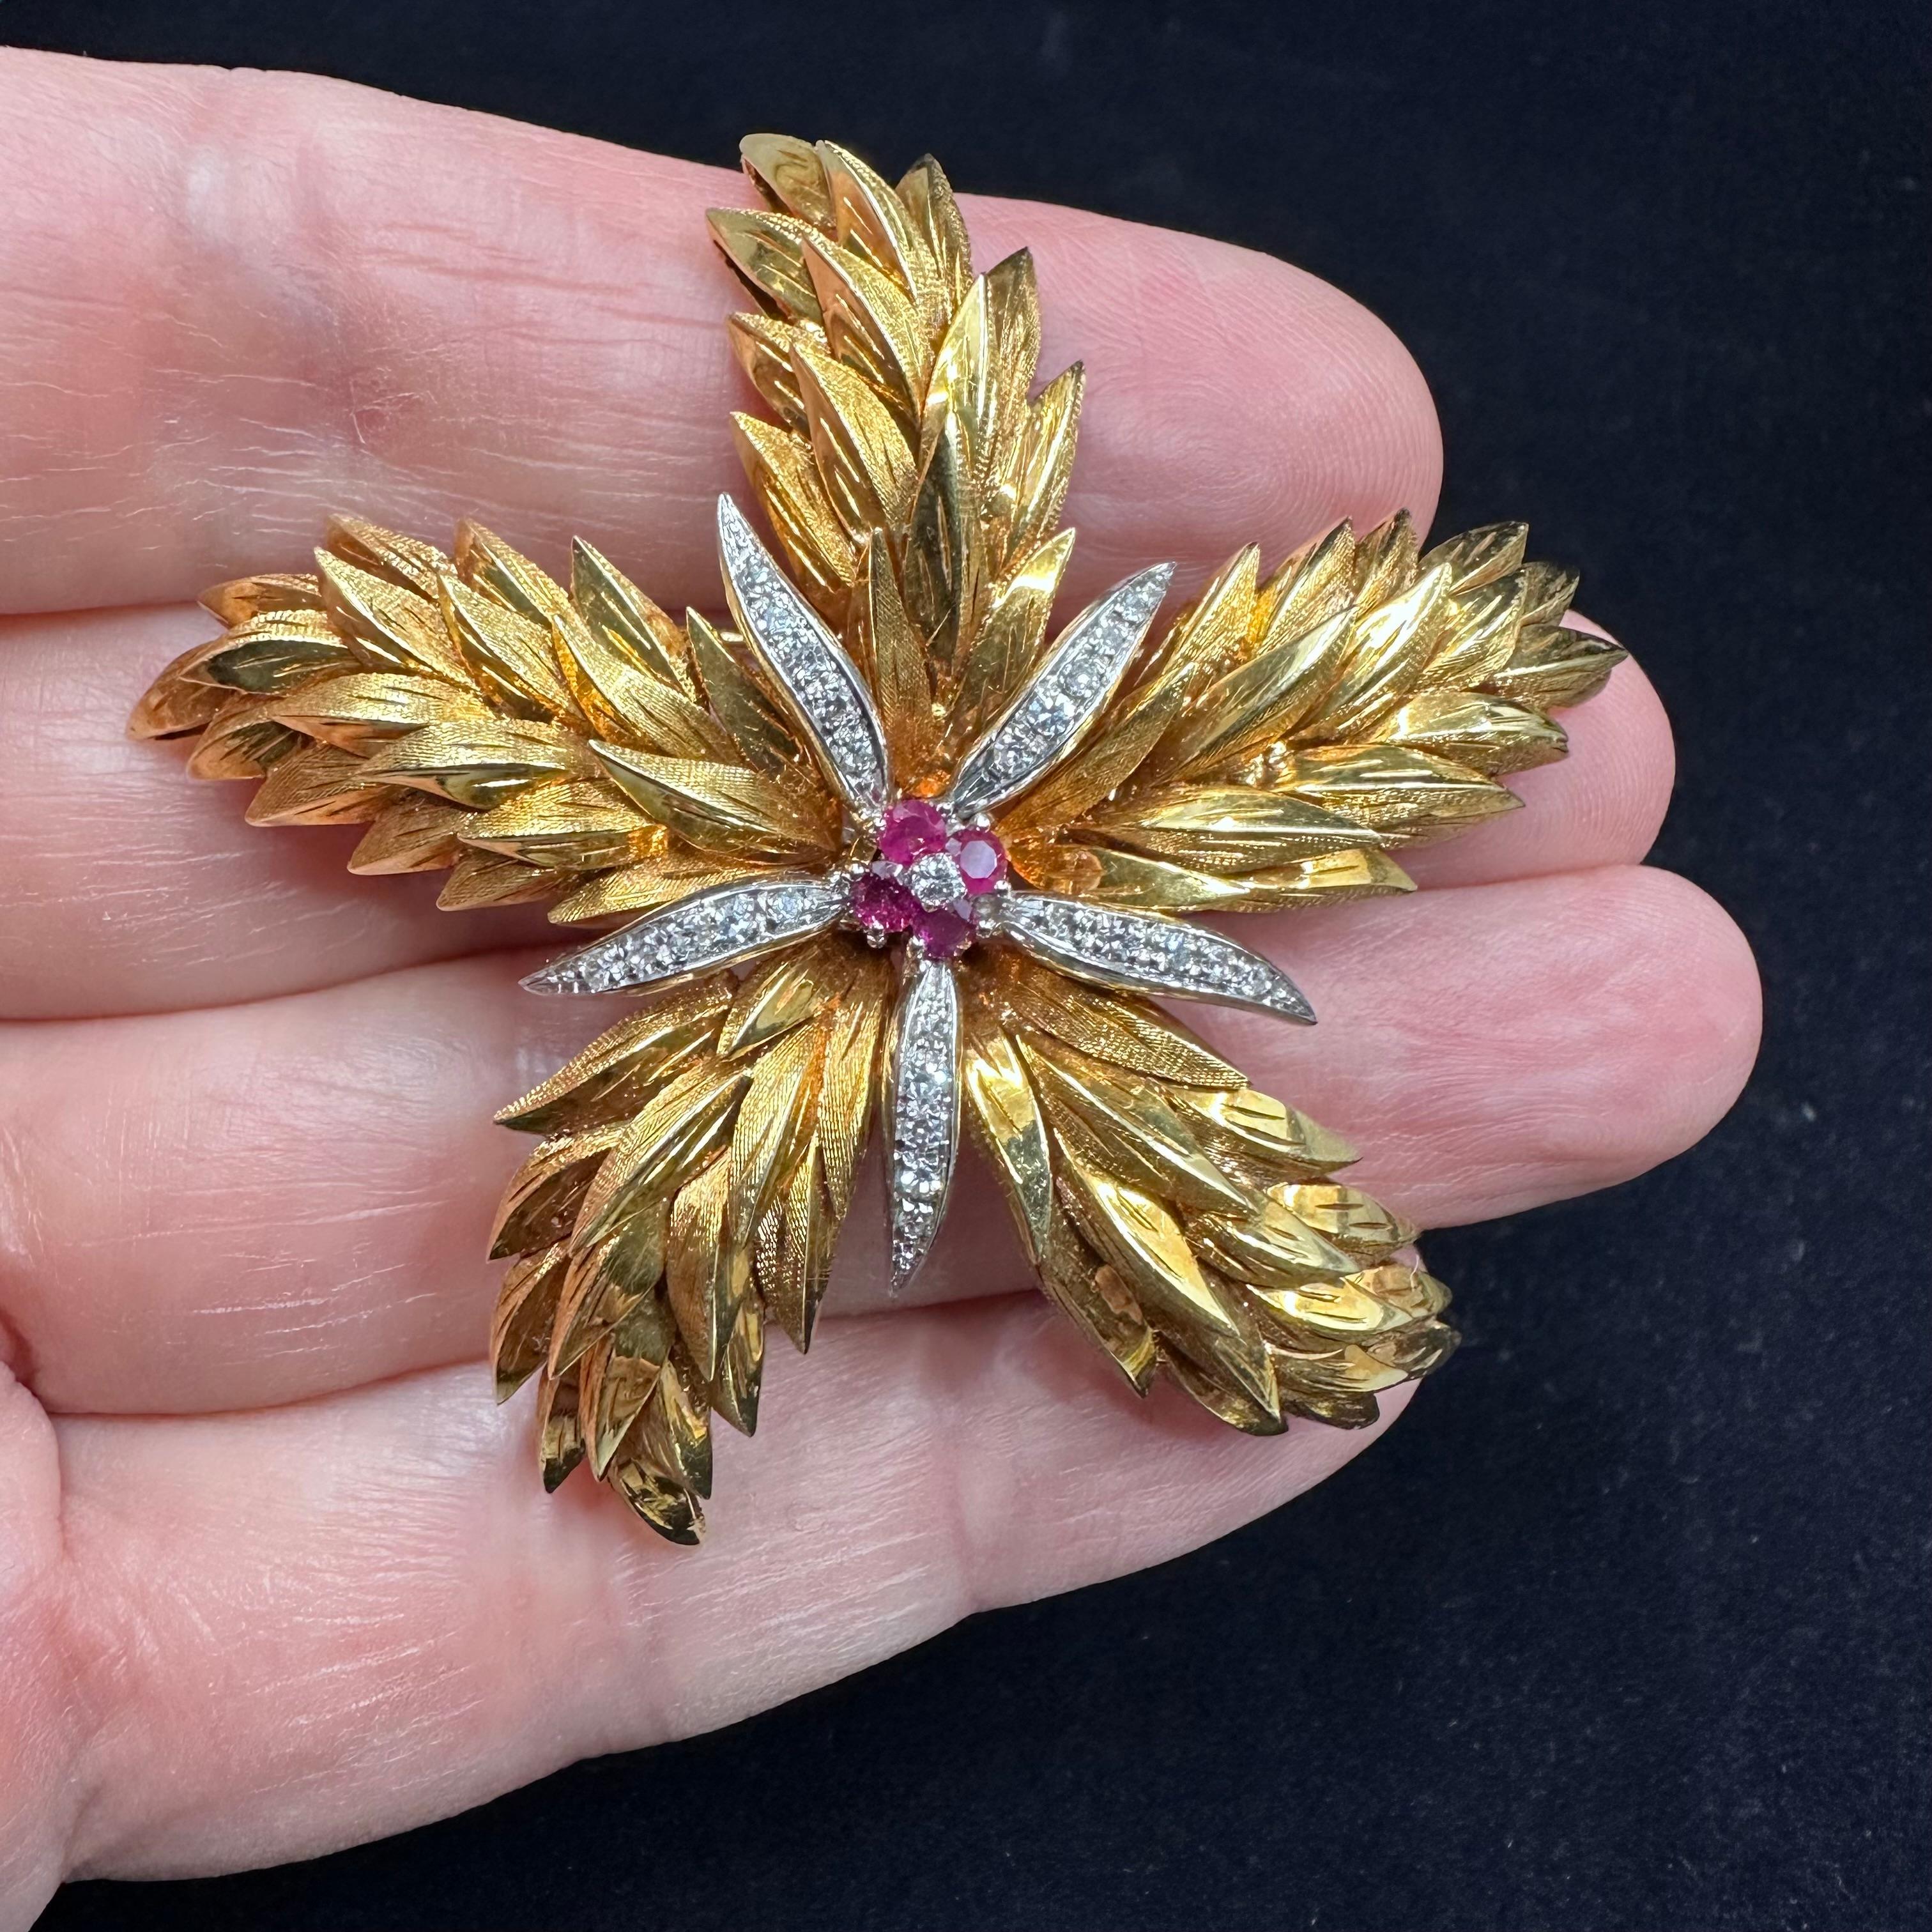 Tiffany and Company
Pine Cone Motif Large Brooch 2.5 Inches Diameter the center element consist of A Diamonds and Rubies Starburst 
18 k Yellow 23 g Weight.
